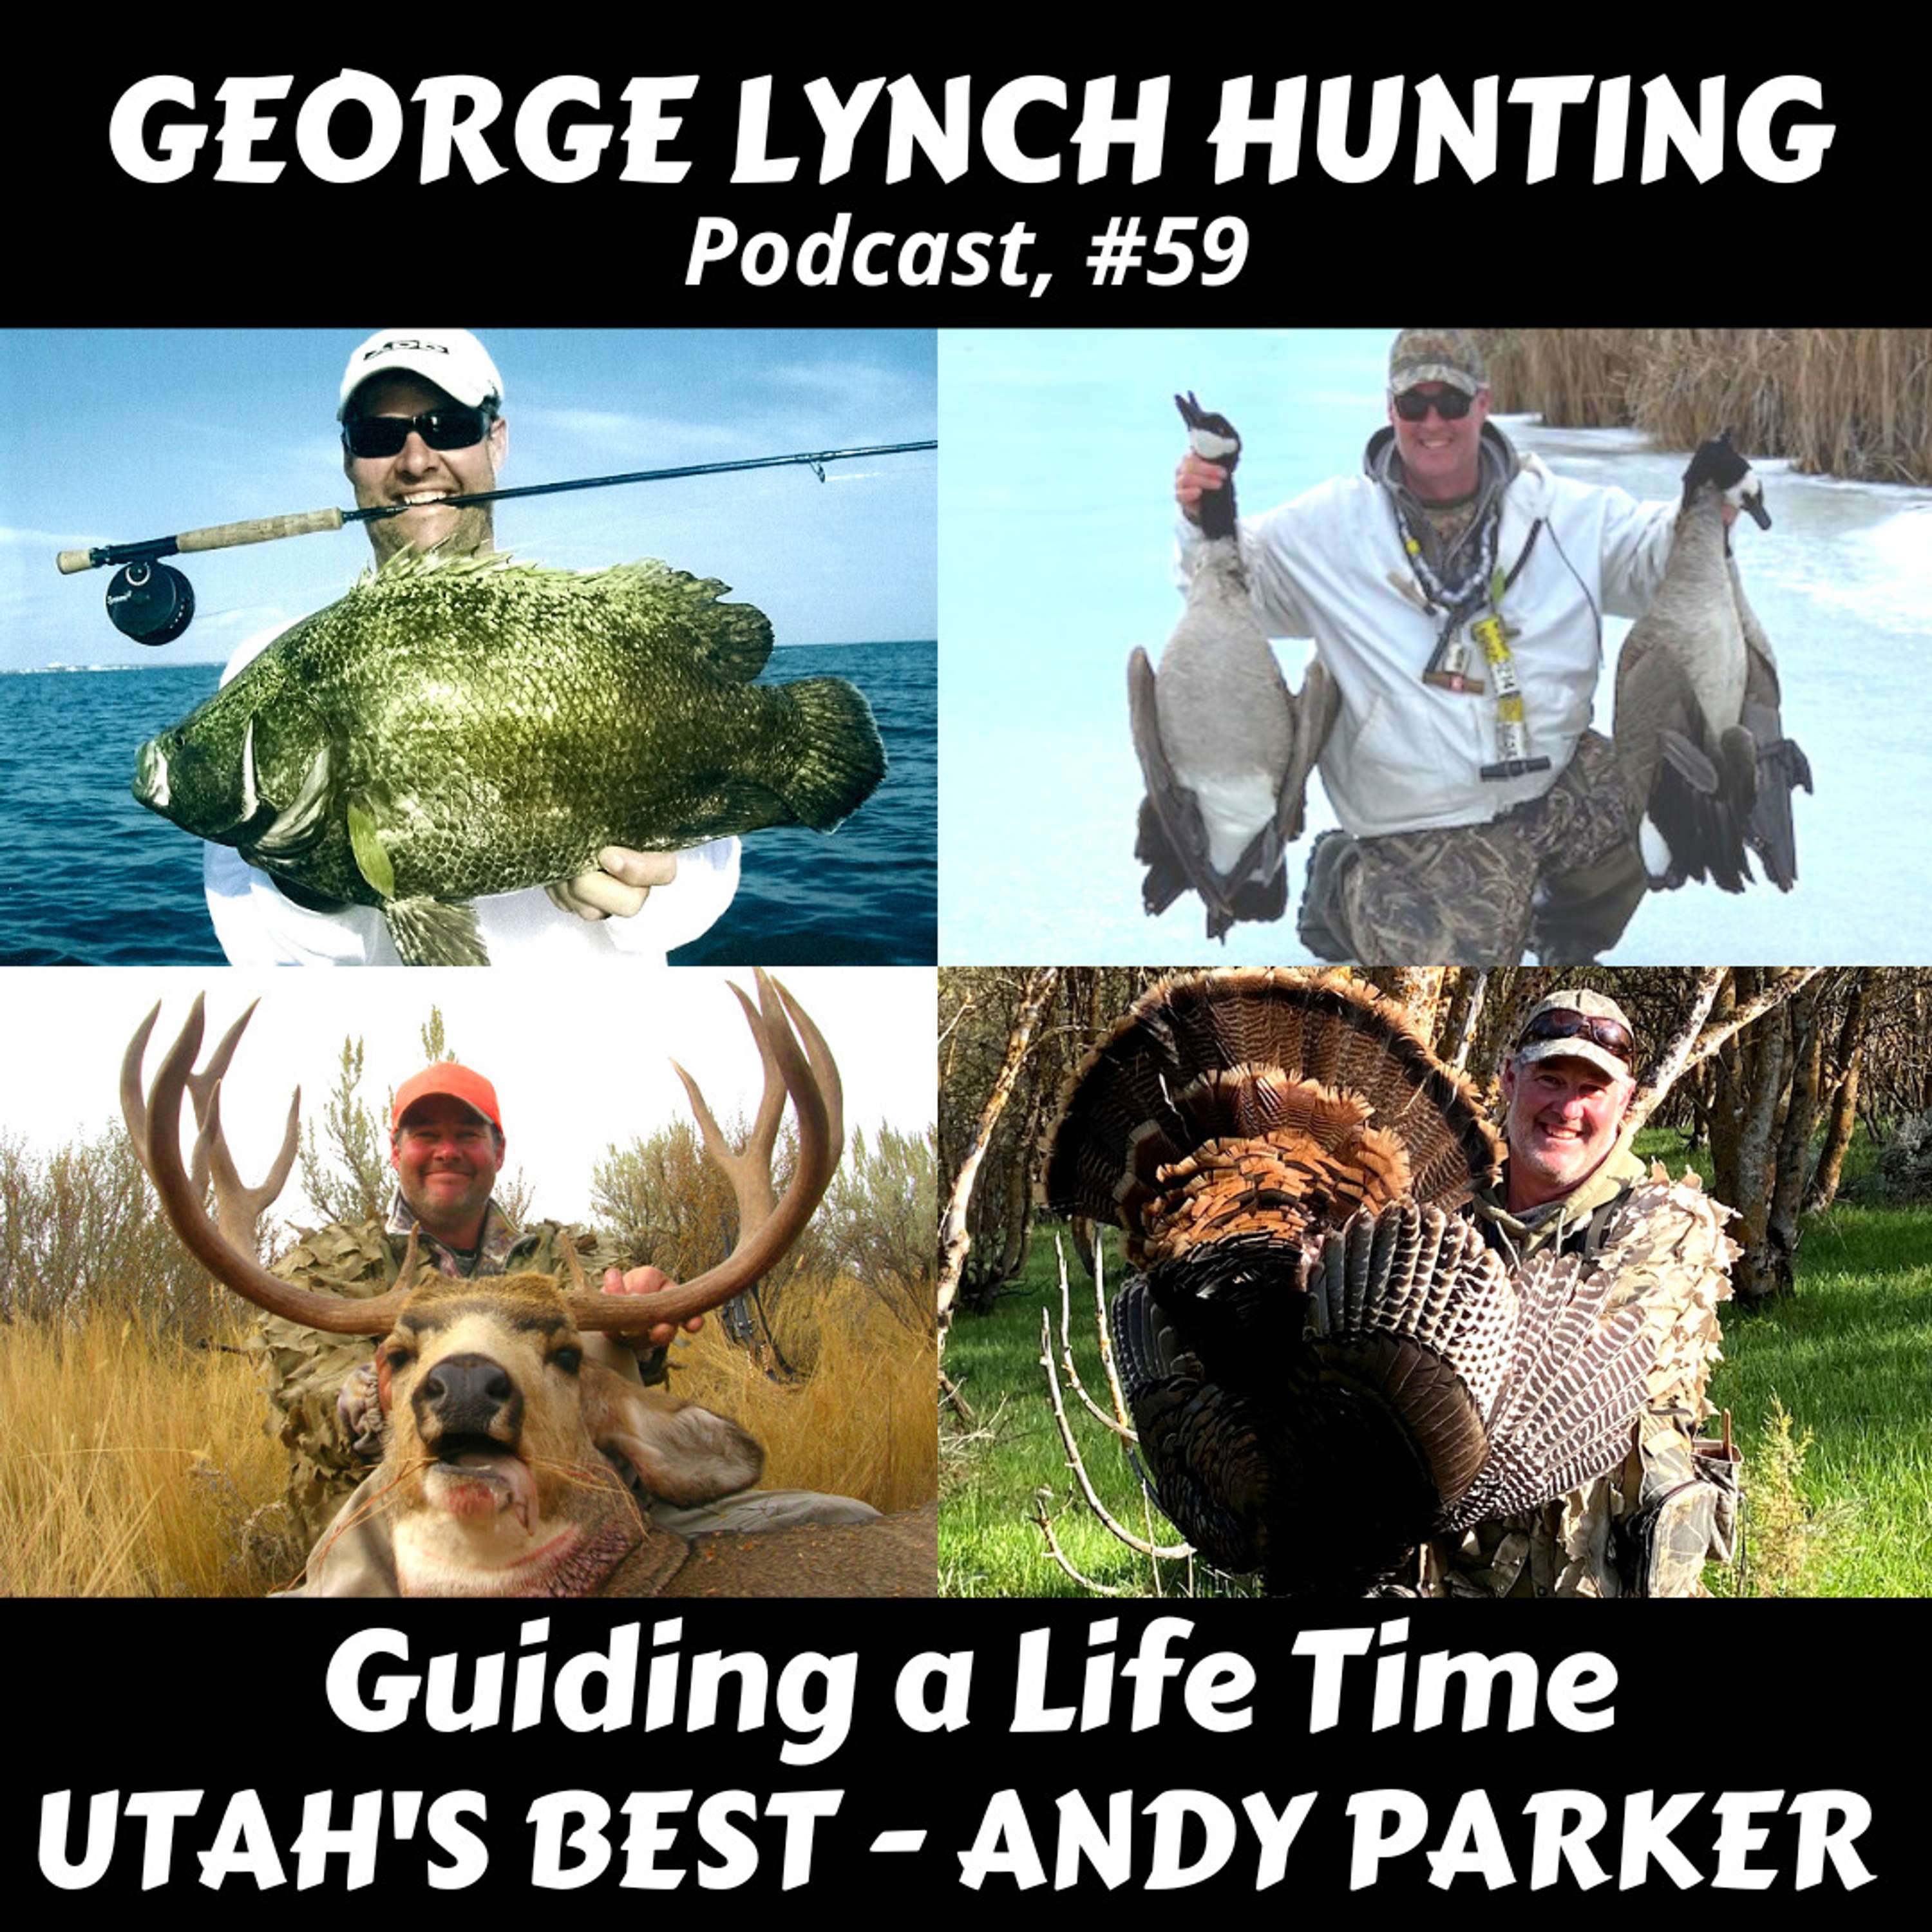 GUIDING A LIFE TIME - Utah's Best - ANDY PARKER with GEORGE LYNCH